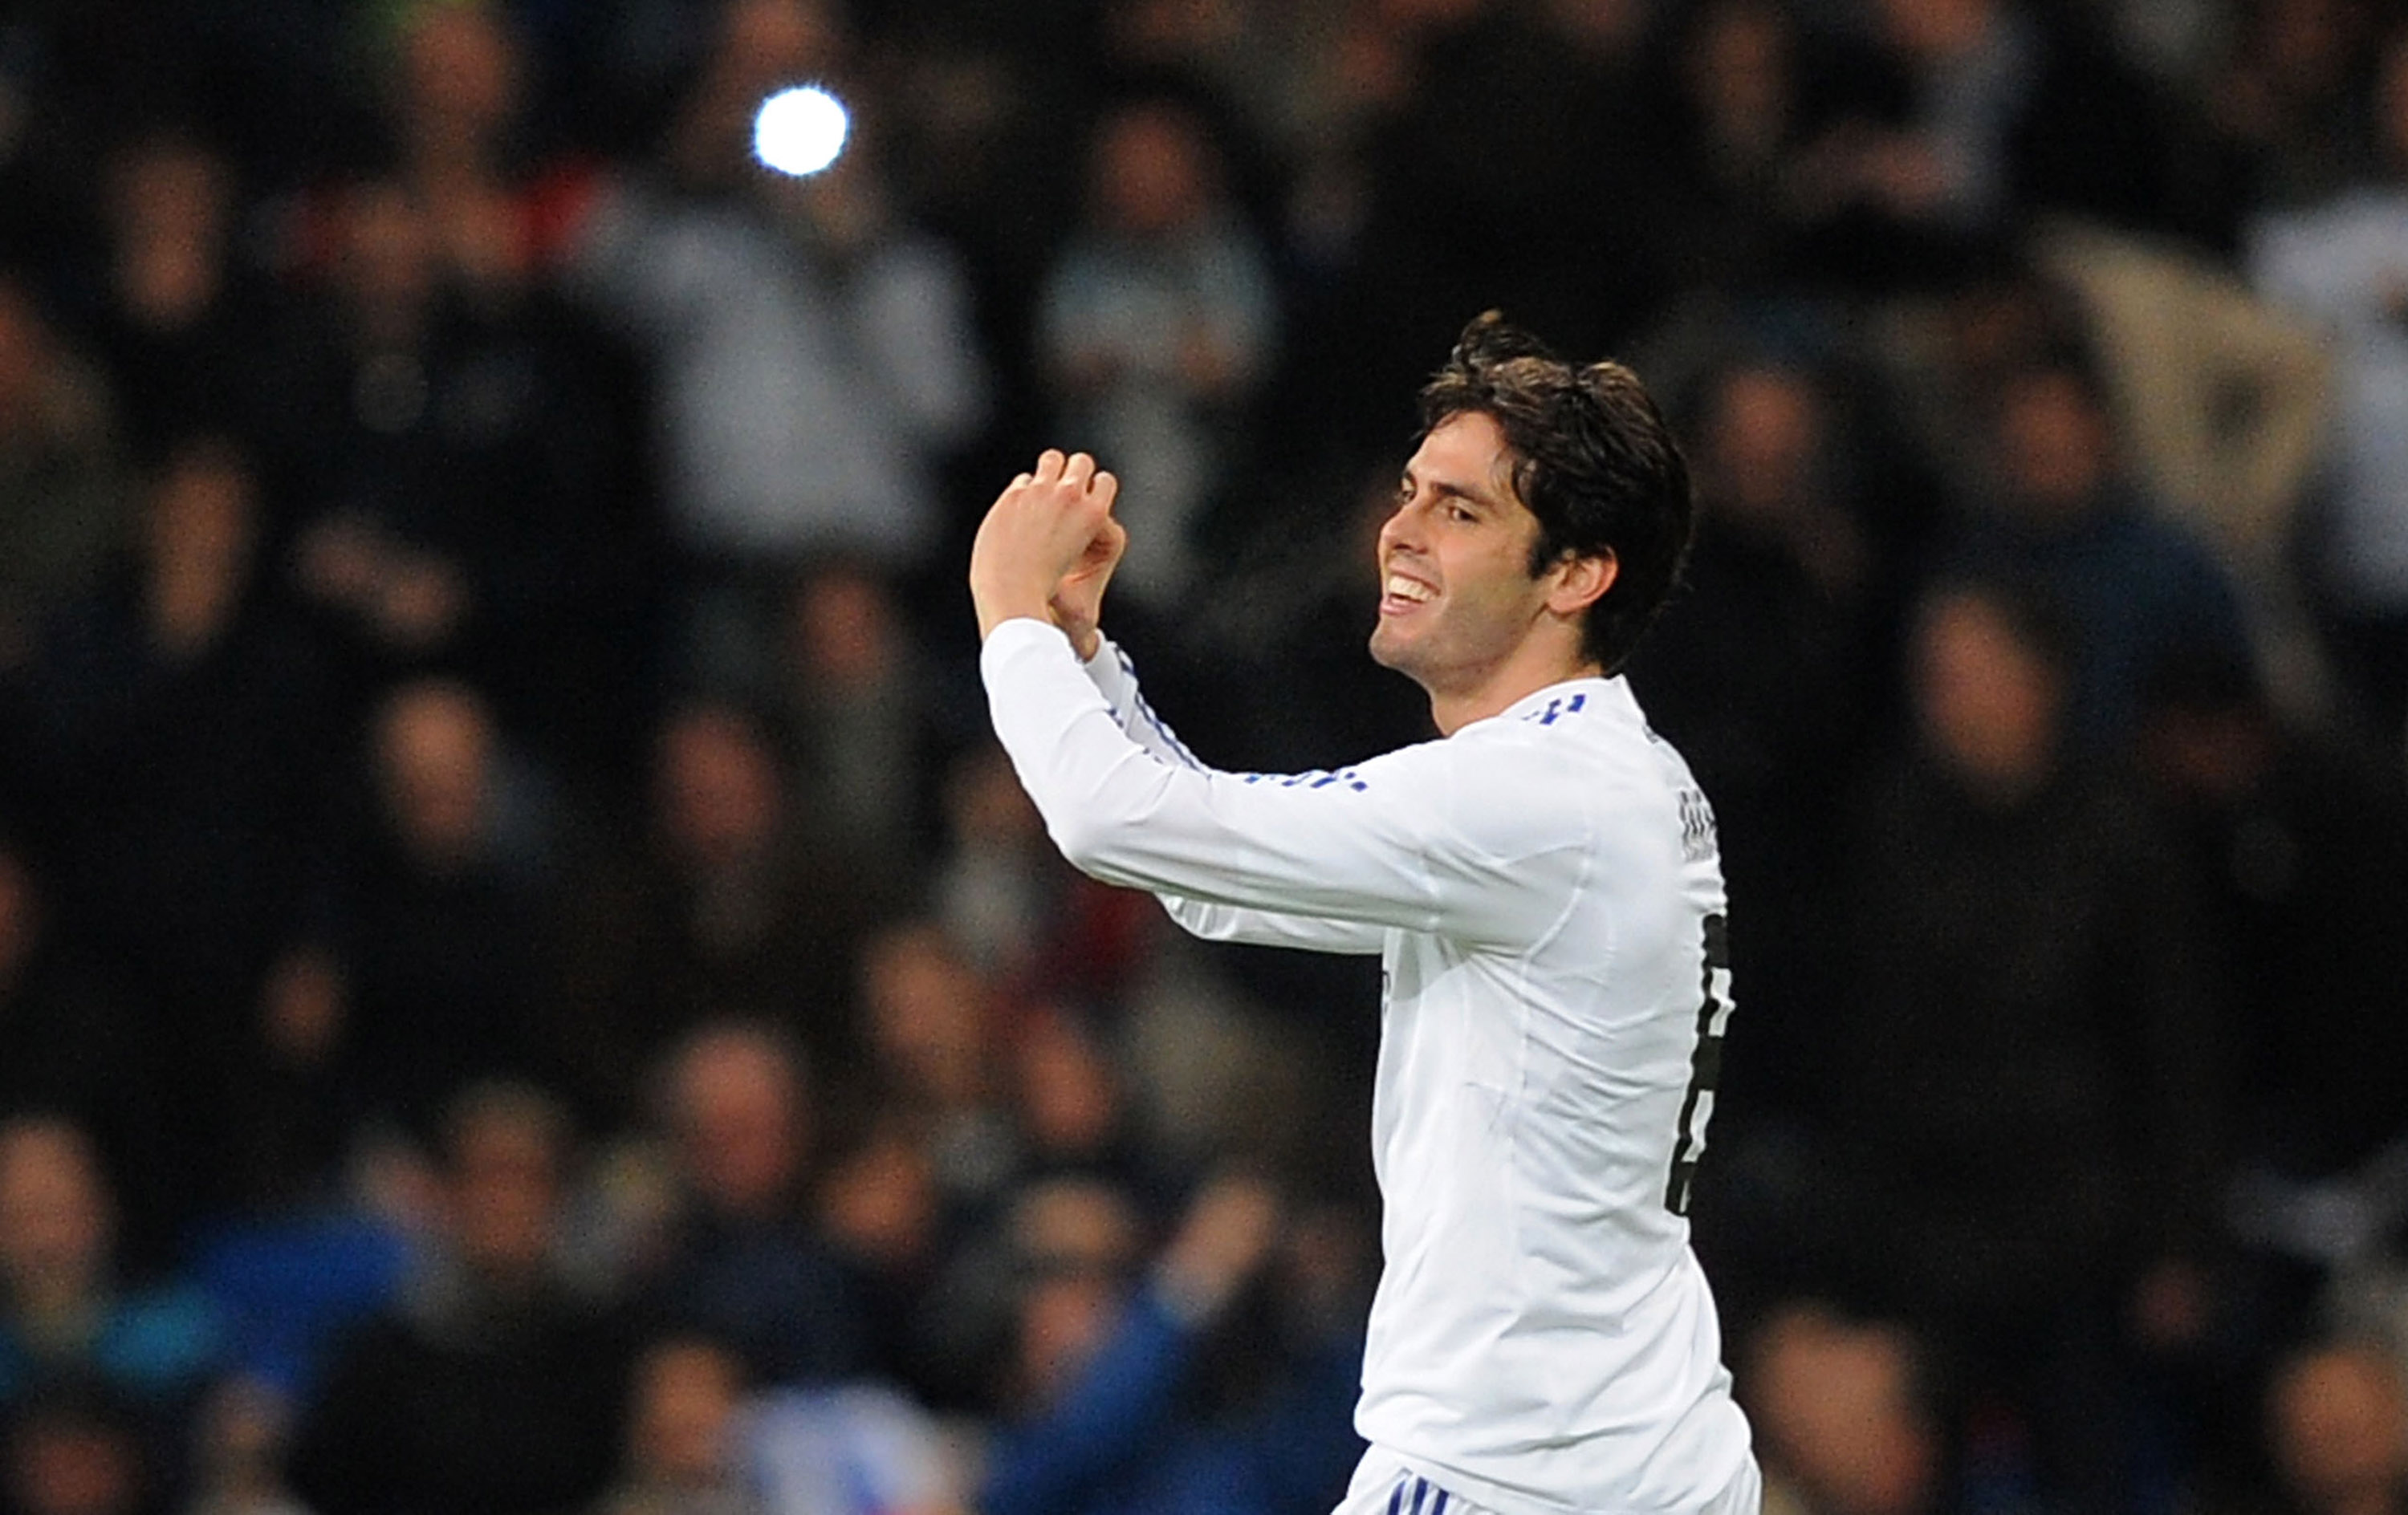 MADRID, SPAIN - JANUARY 09:  Kaka of Real Madrid celebrates after scoring Real's fourth goal during the La Liga match between Real Madrid and Villarreal at Estadio Santiago Bernabeu on January 9, 2011 in Madrid, Spain.  (Photo by Denis Doyle/Getty Images)